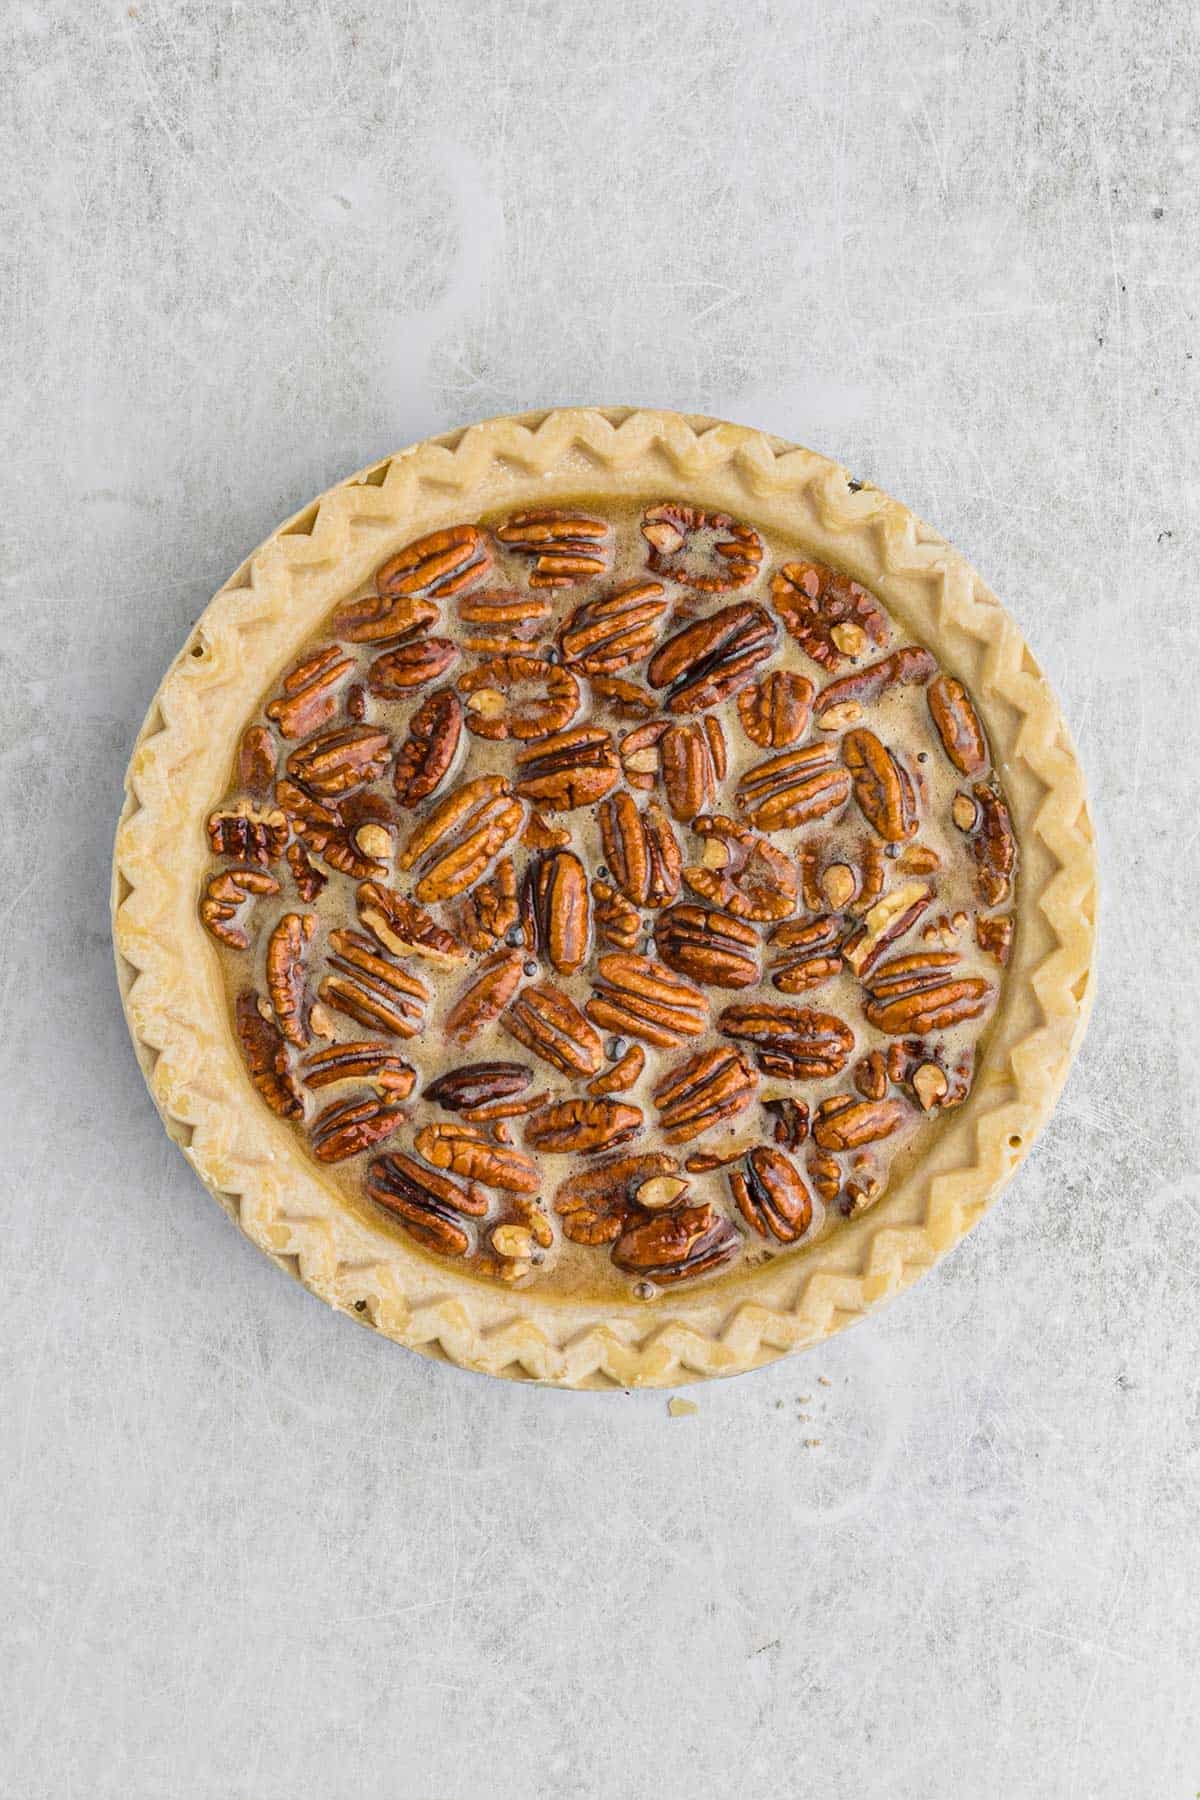 Pecan pie filling poured into an unbaked pie shell.